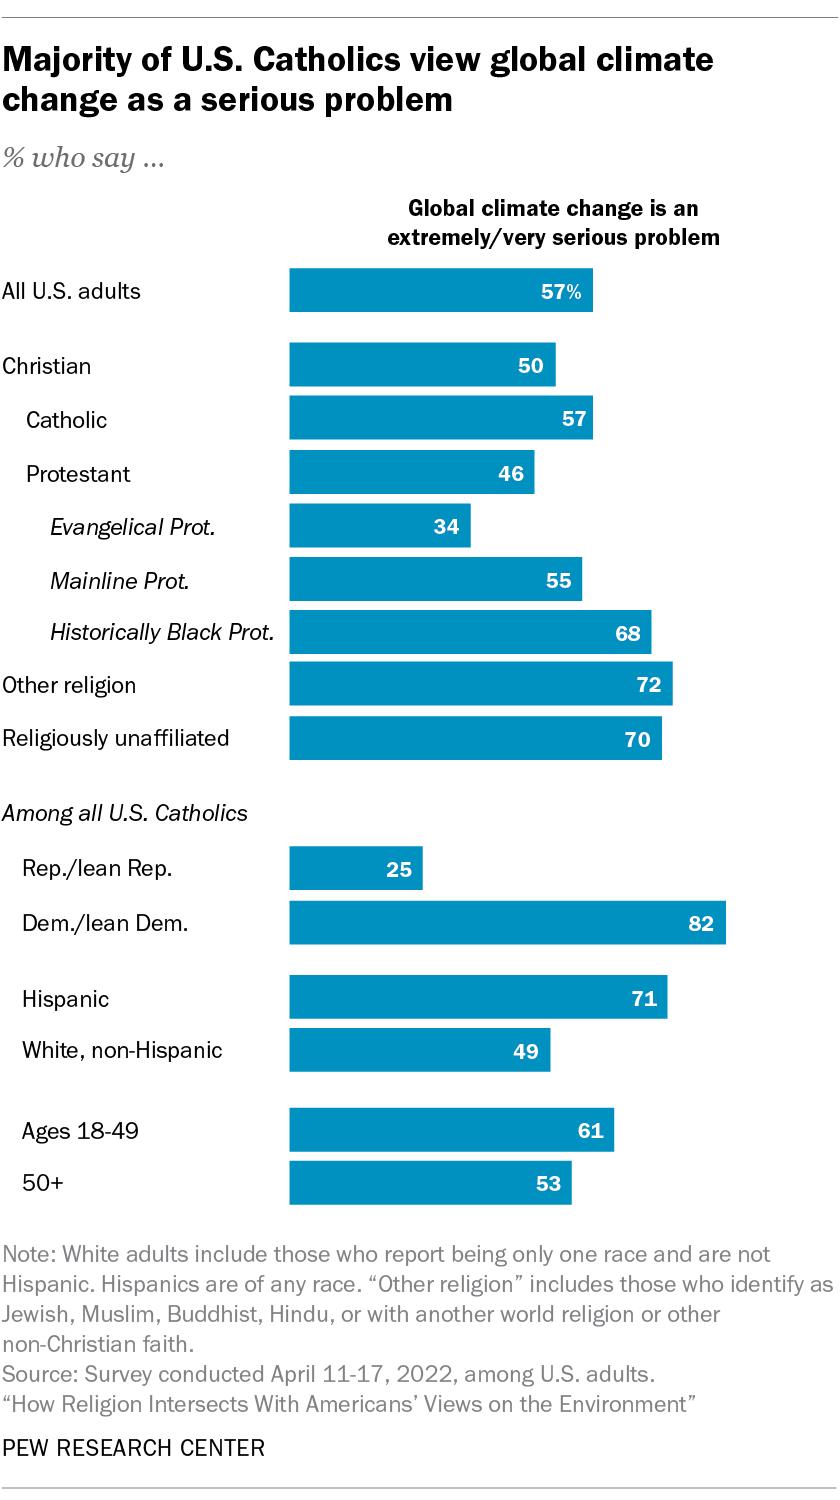 A bar chart showing that the majority of U.S. Catholics view global climate change as a serious problem